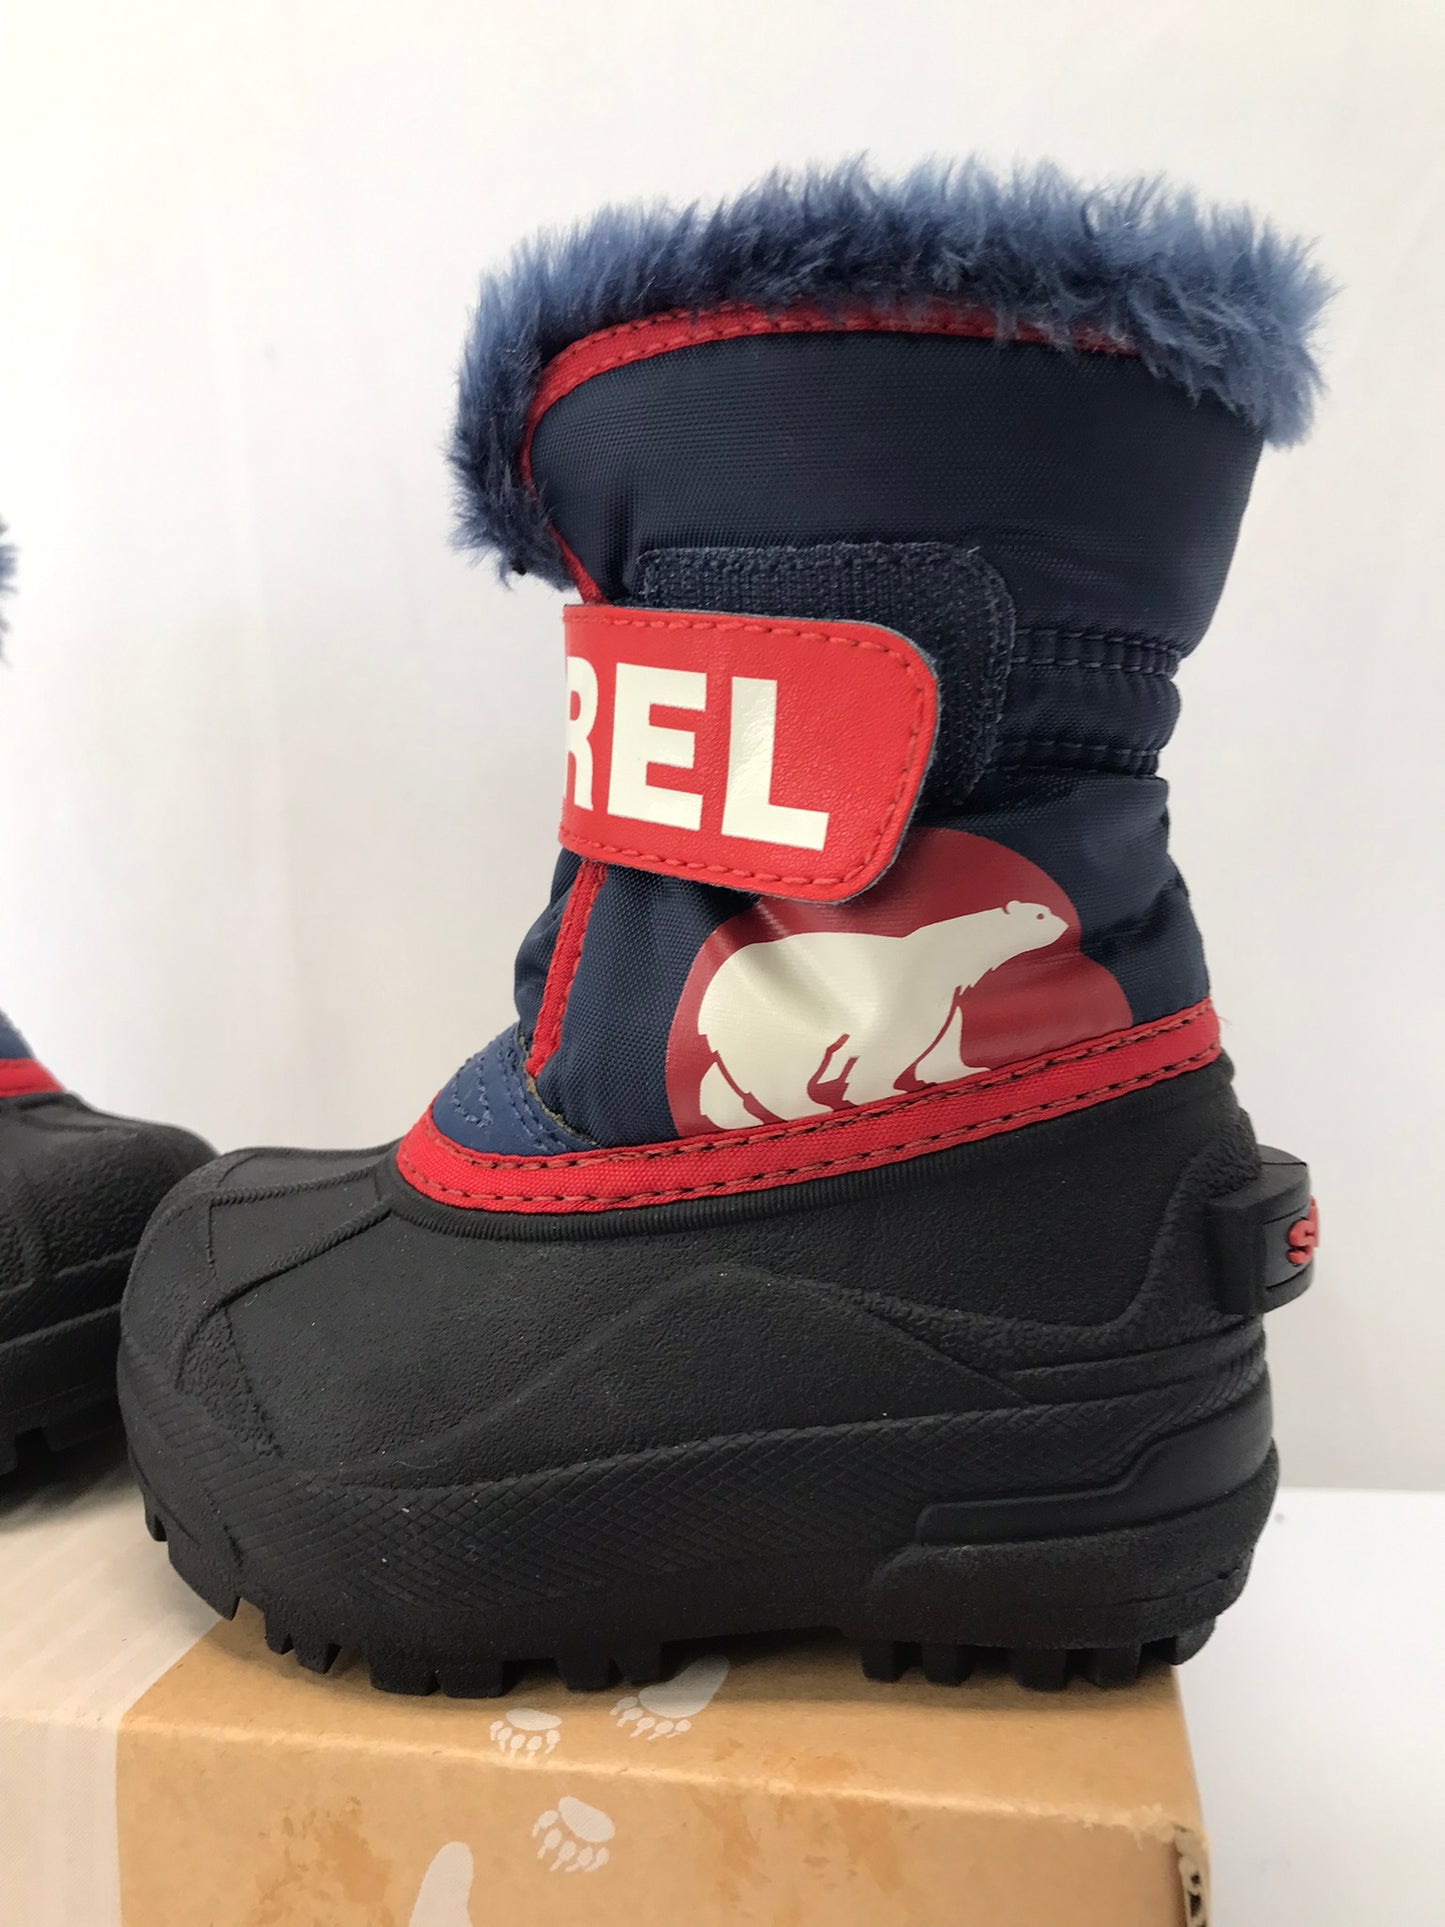 Winter Boots Infant Toddler Size 6 Sorel Blue Red New In Box